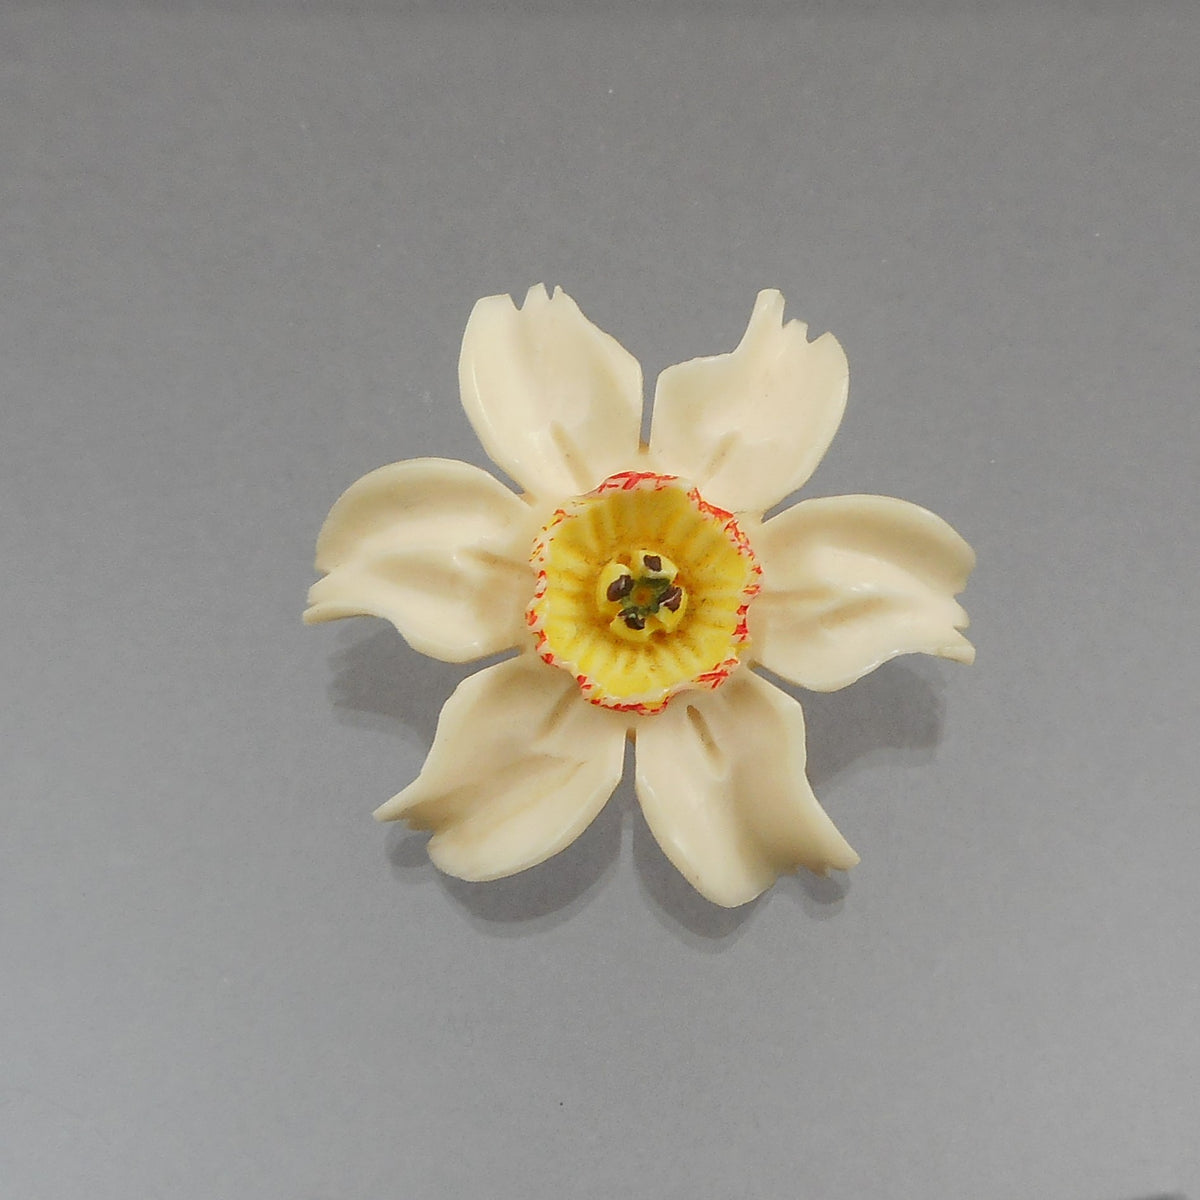 Antique Vintage Carved Celluloid Brooch Daffodil Flower Pin Faux Ivory –  Lori Bilodeau Antiques